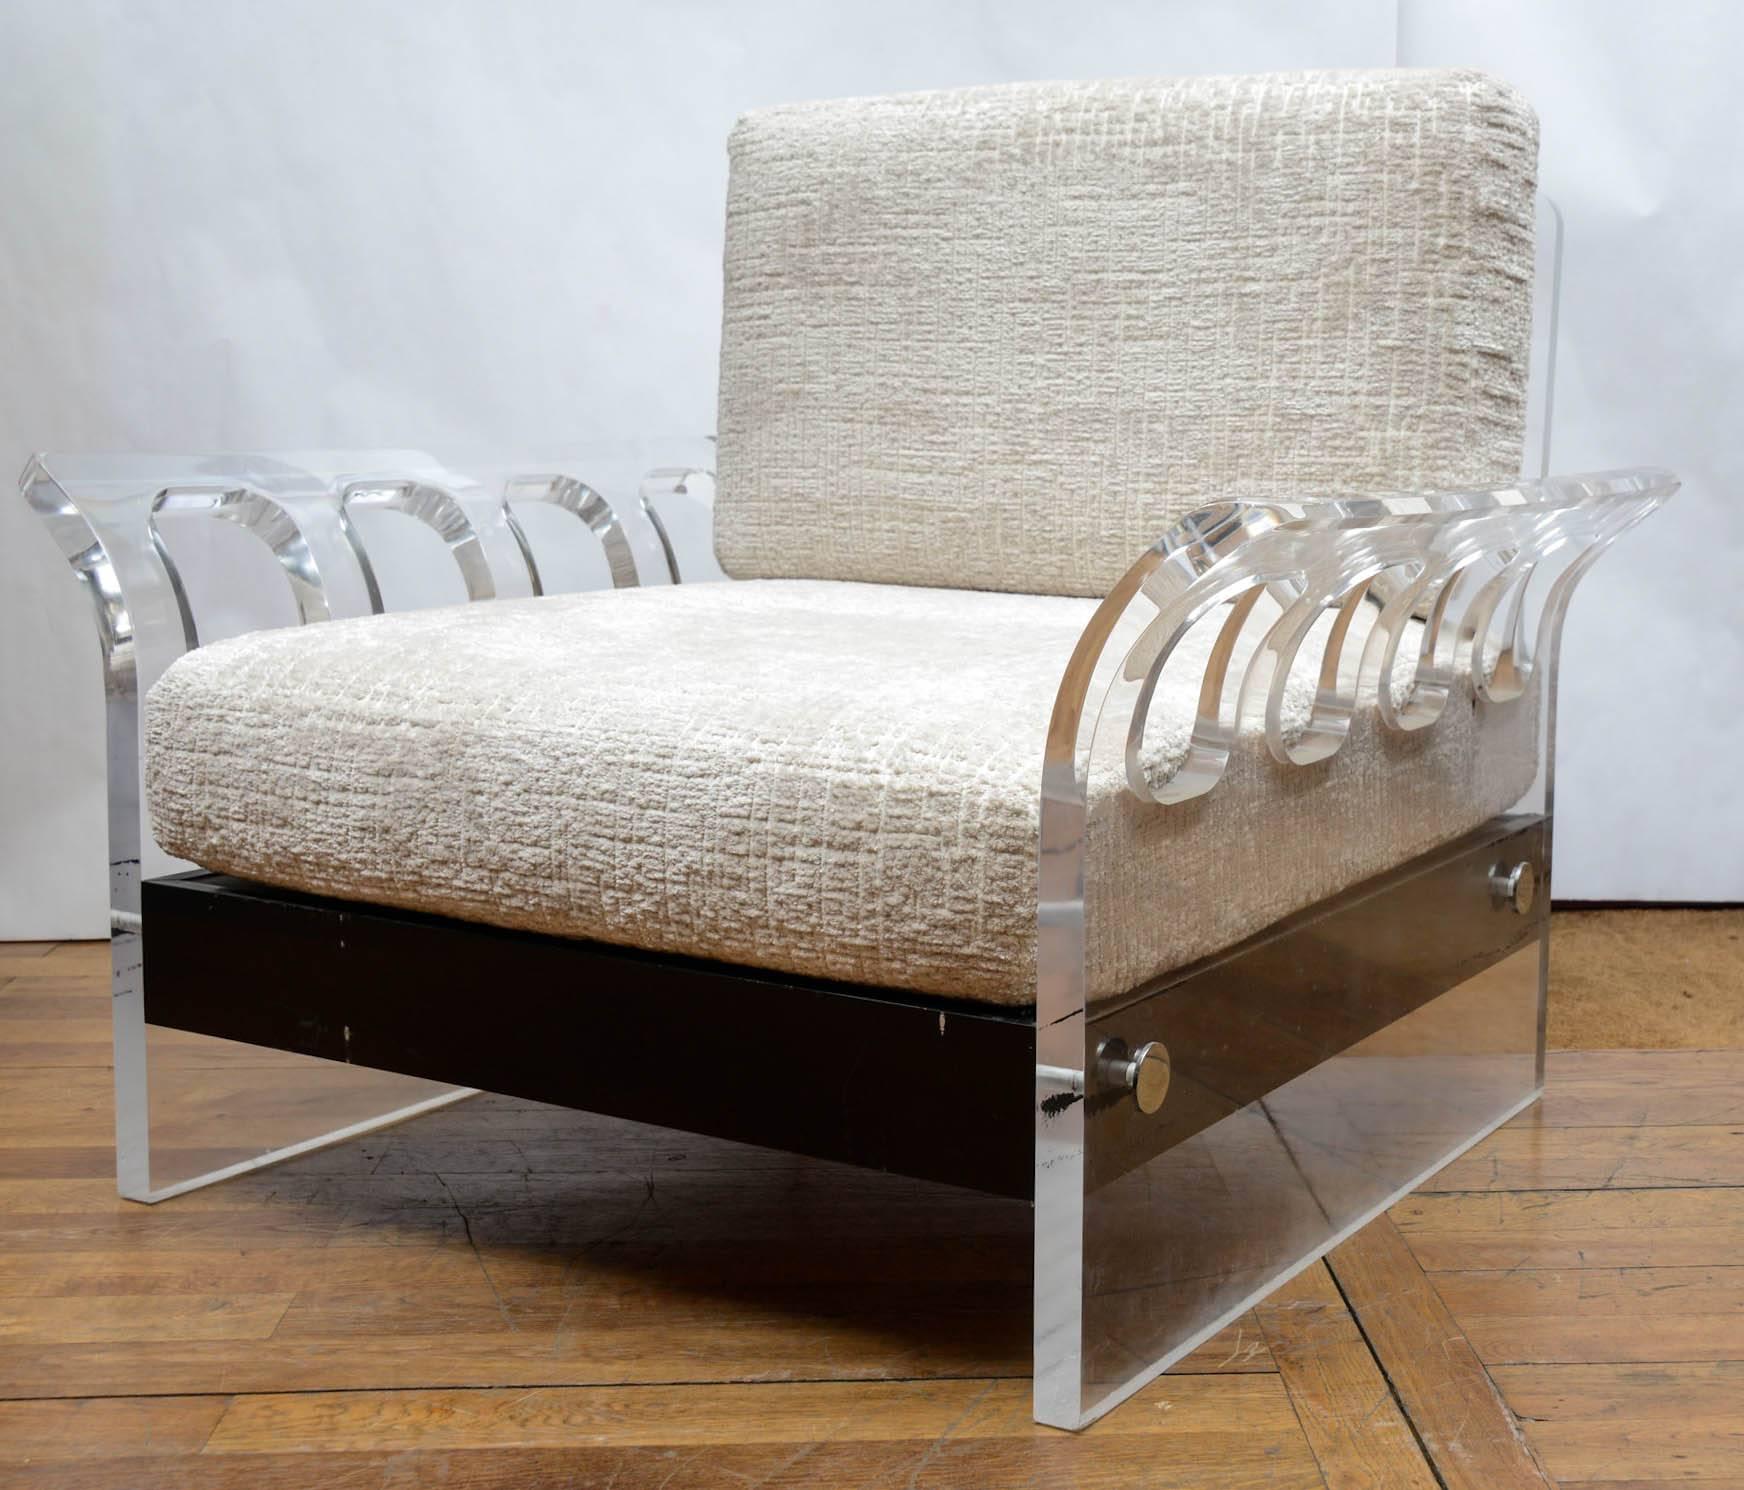 Plexiglass armchair, back and seat upholstered with ecru fabric.